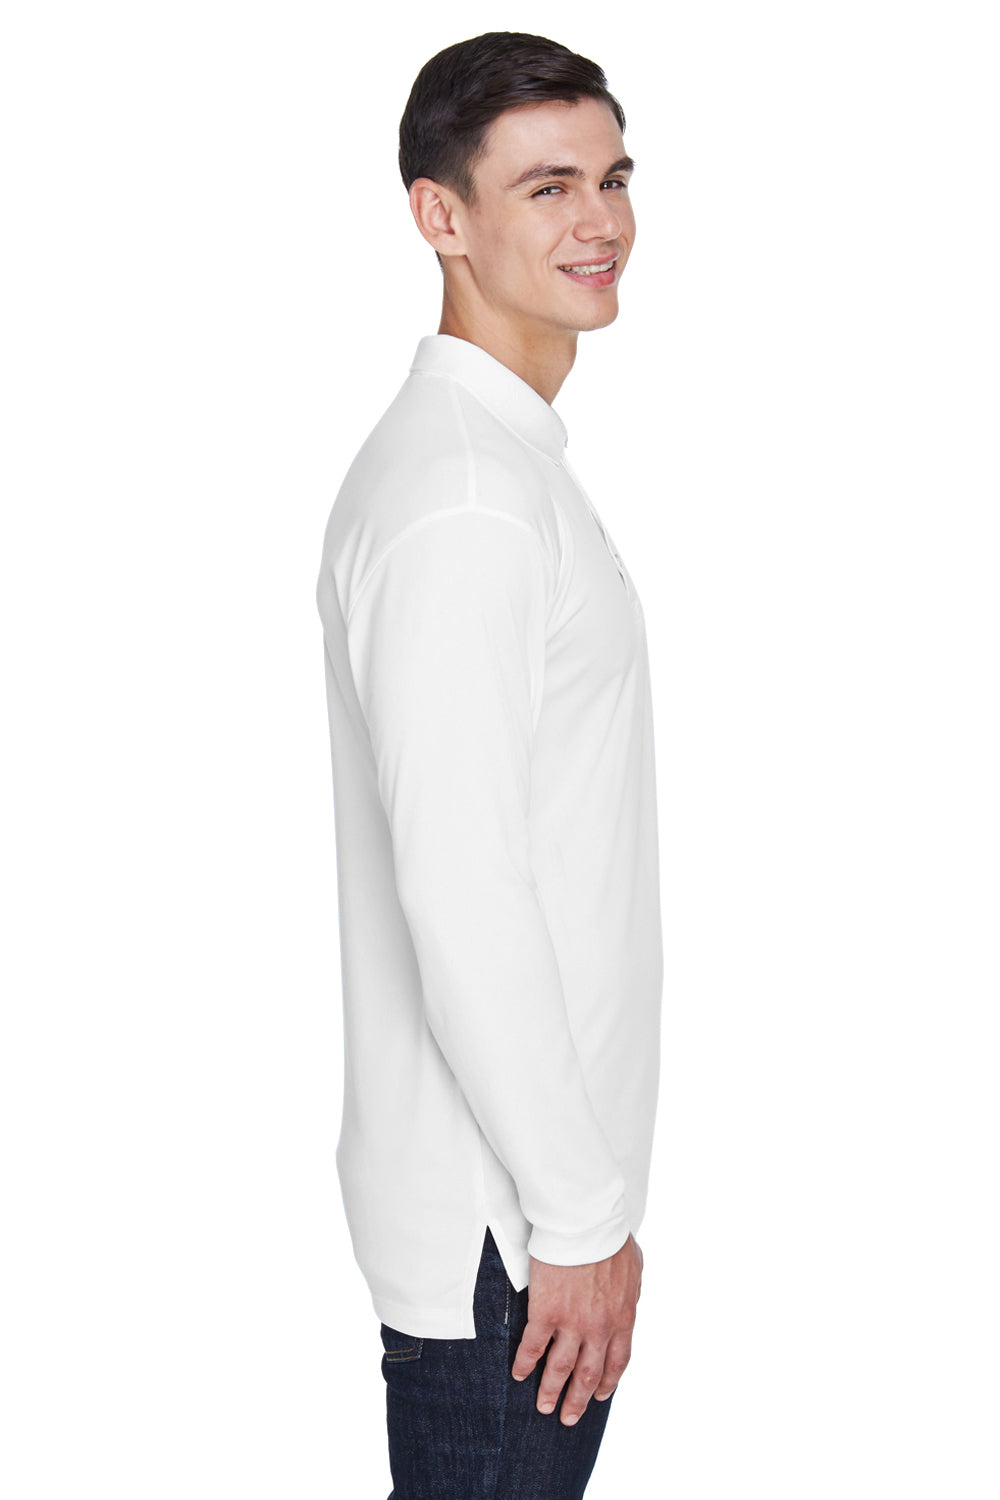 UltraClub 8405LS Mens Cool & Dry Moisture Wicking Long Sleeve Polo Shirt White Side